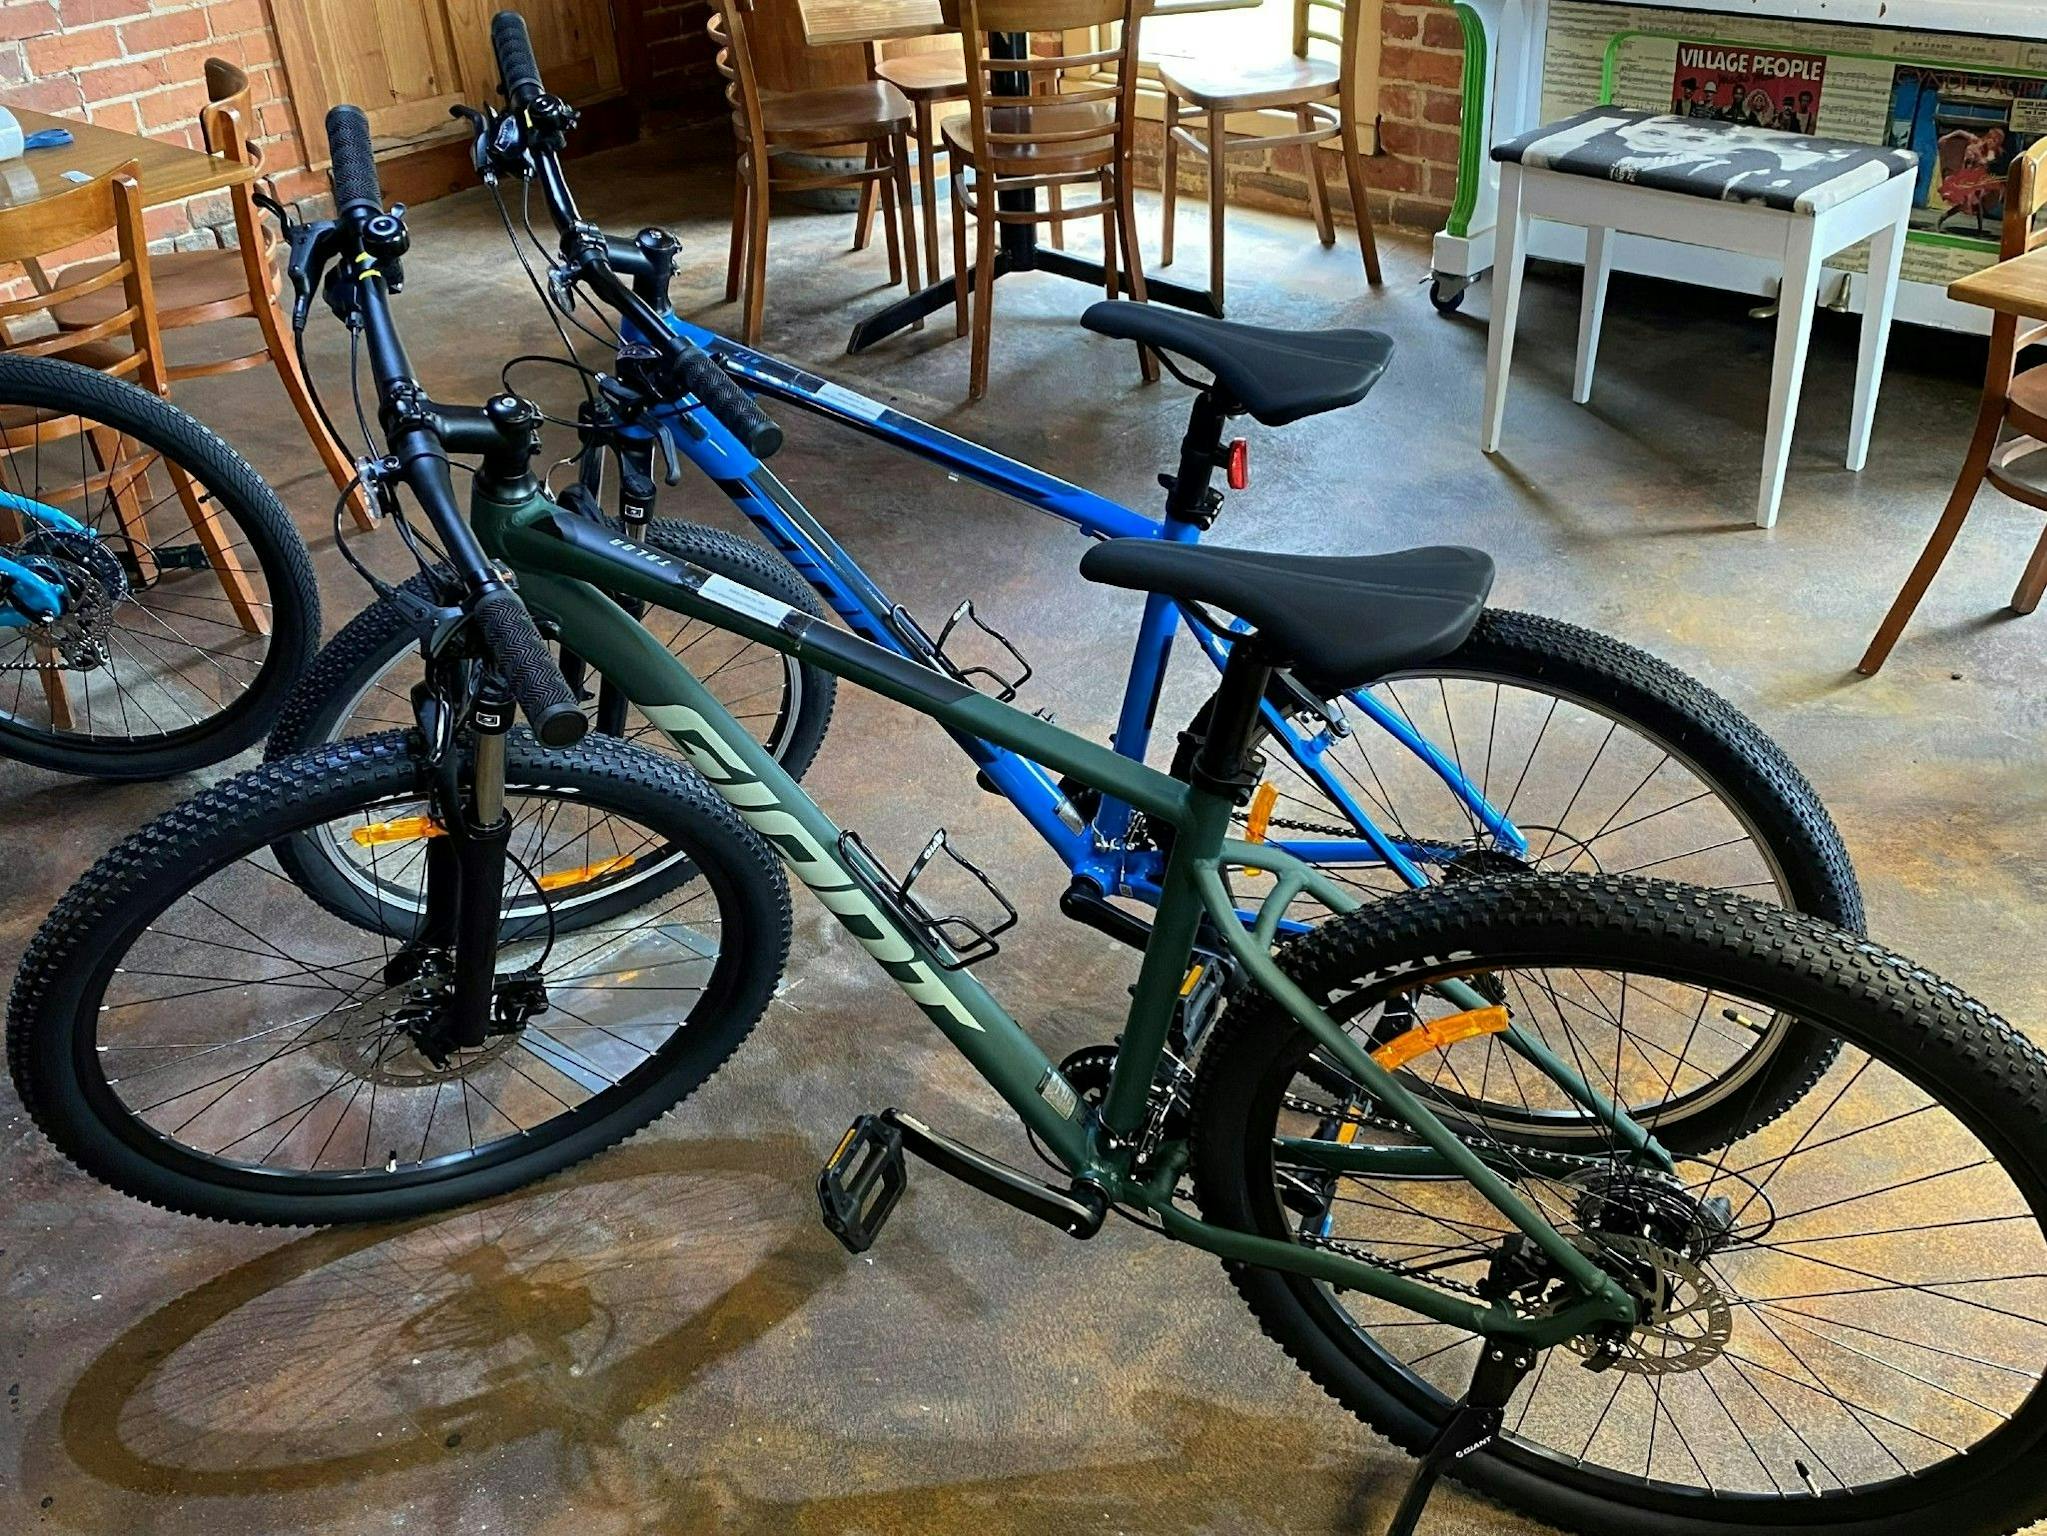 Large bikes available for the taller adult